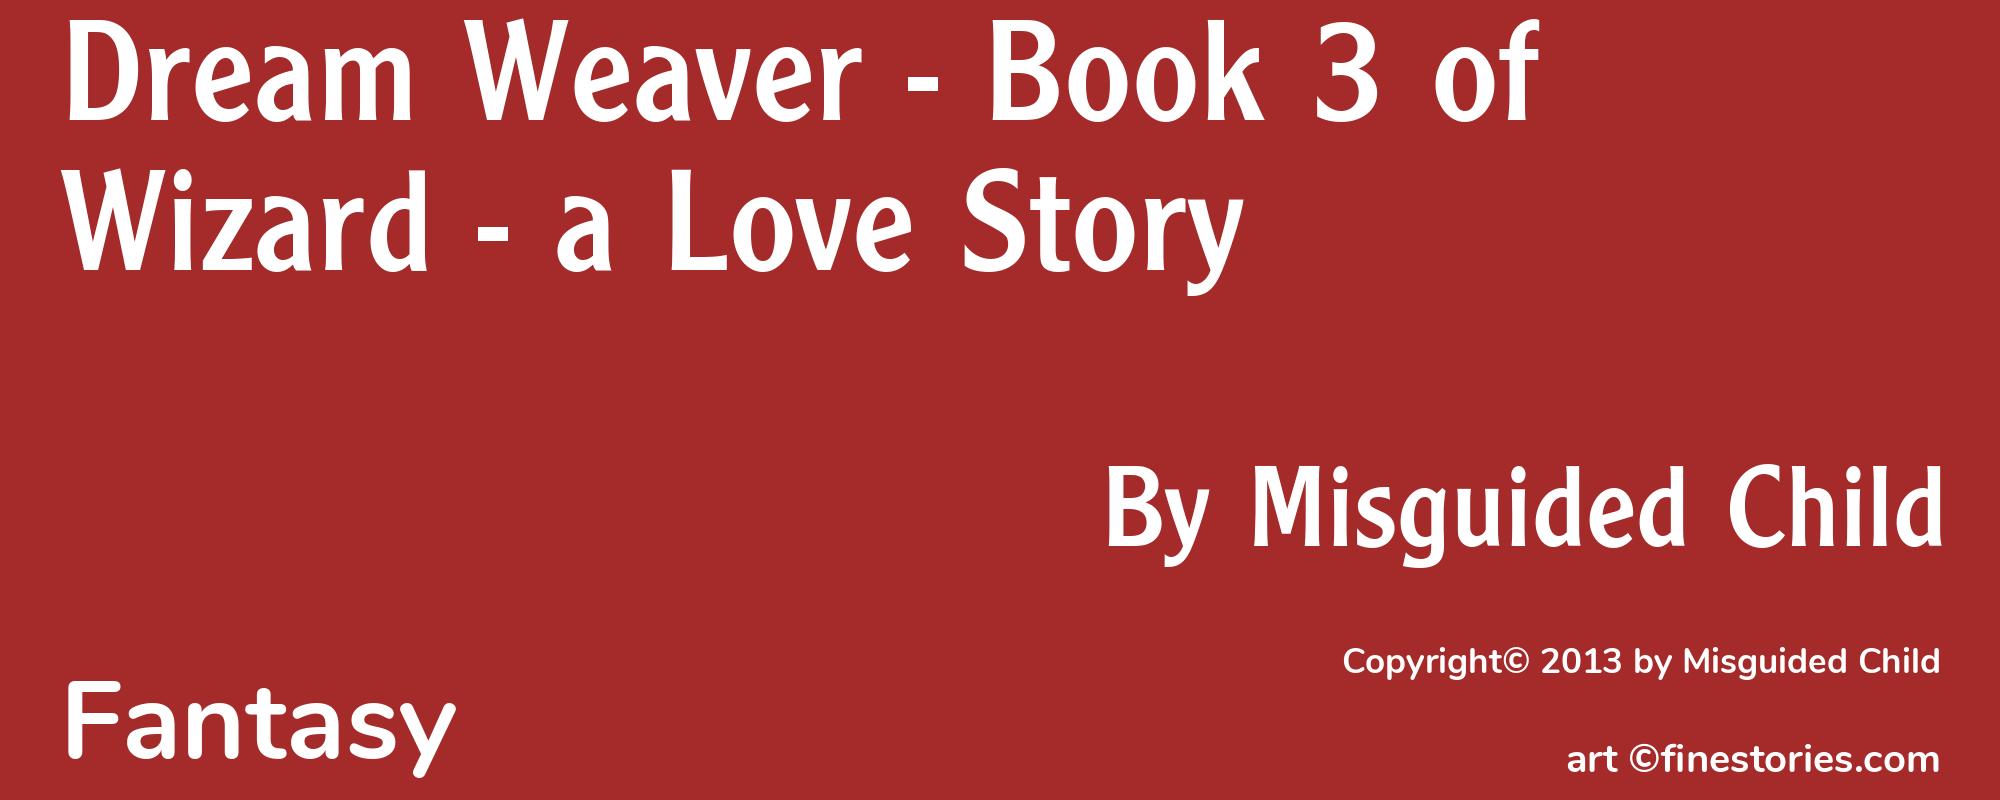 Dream Weaver - Book 3 of Wizard - a Love Story - Cover